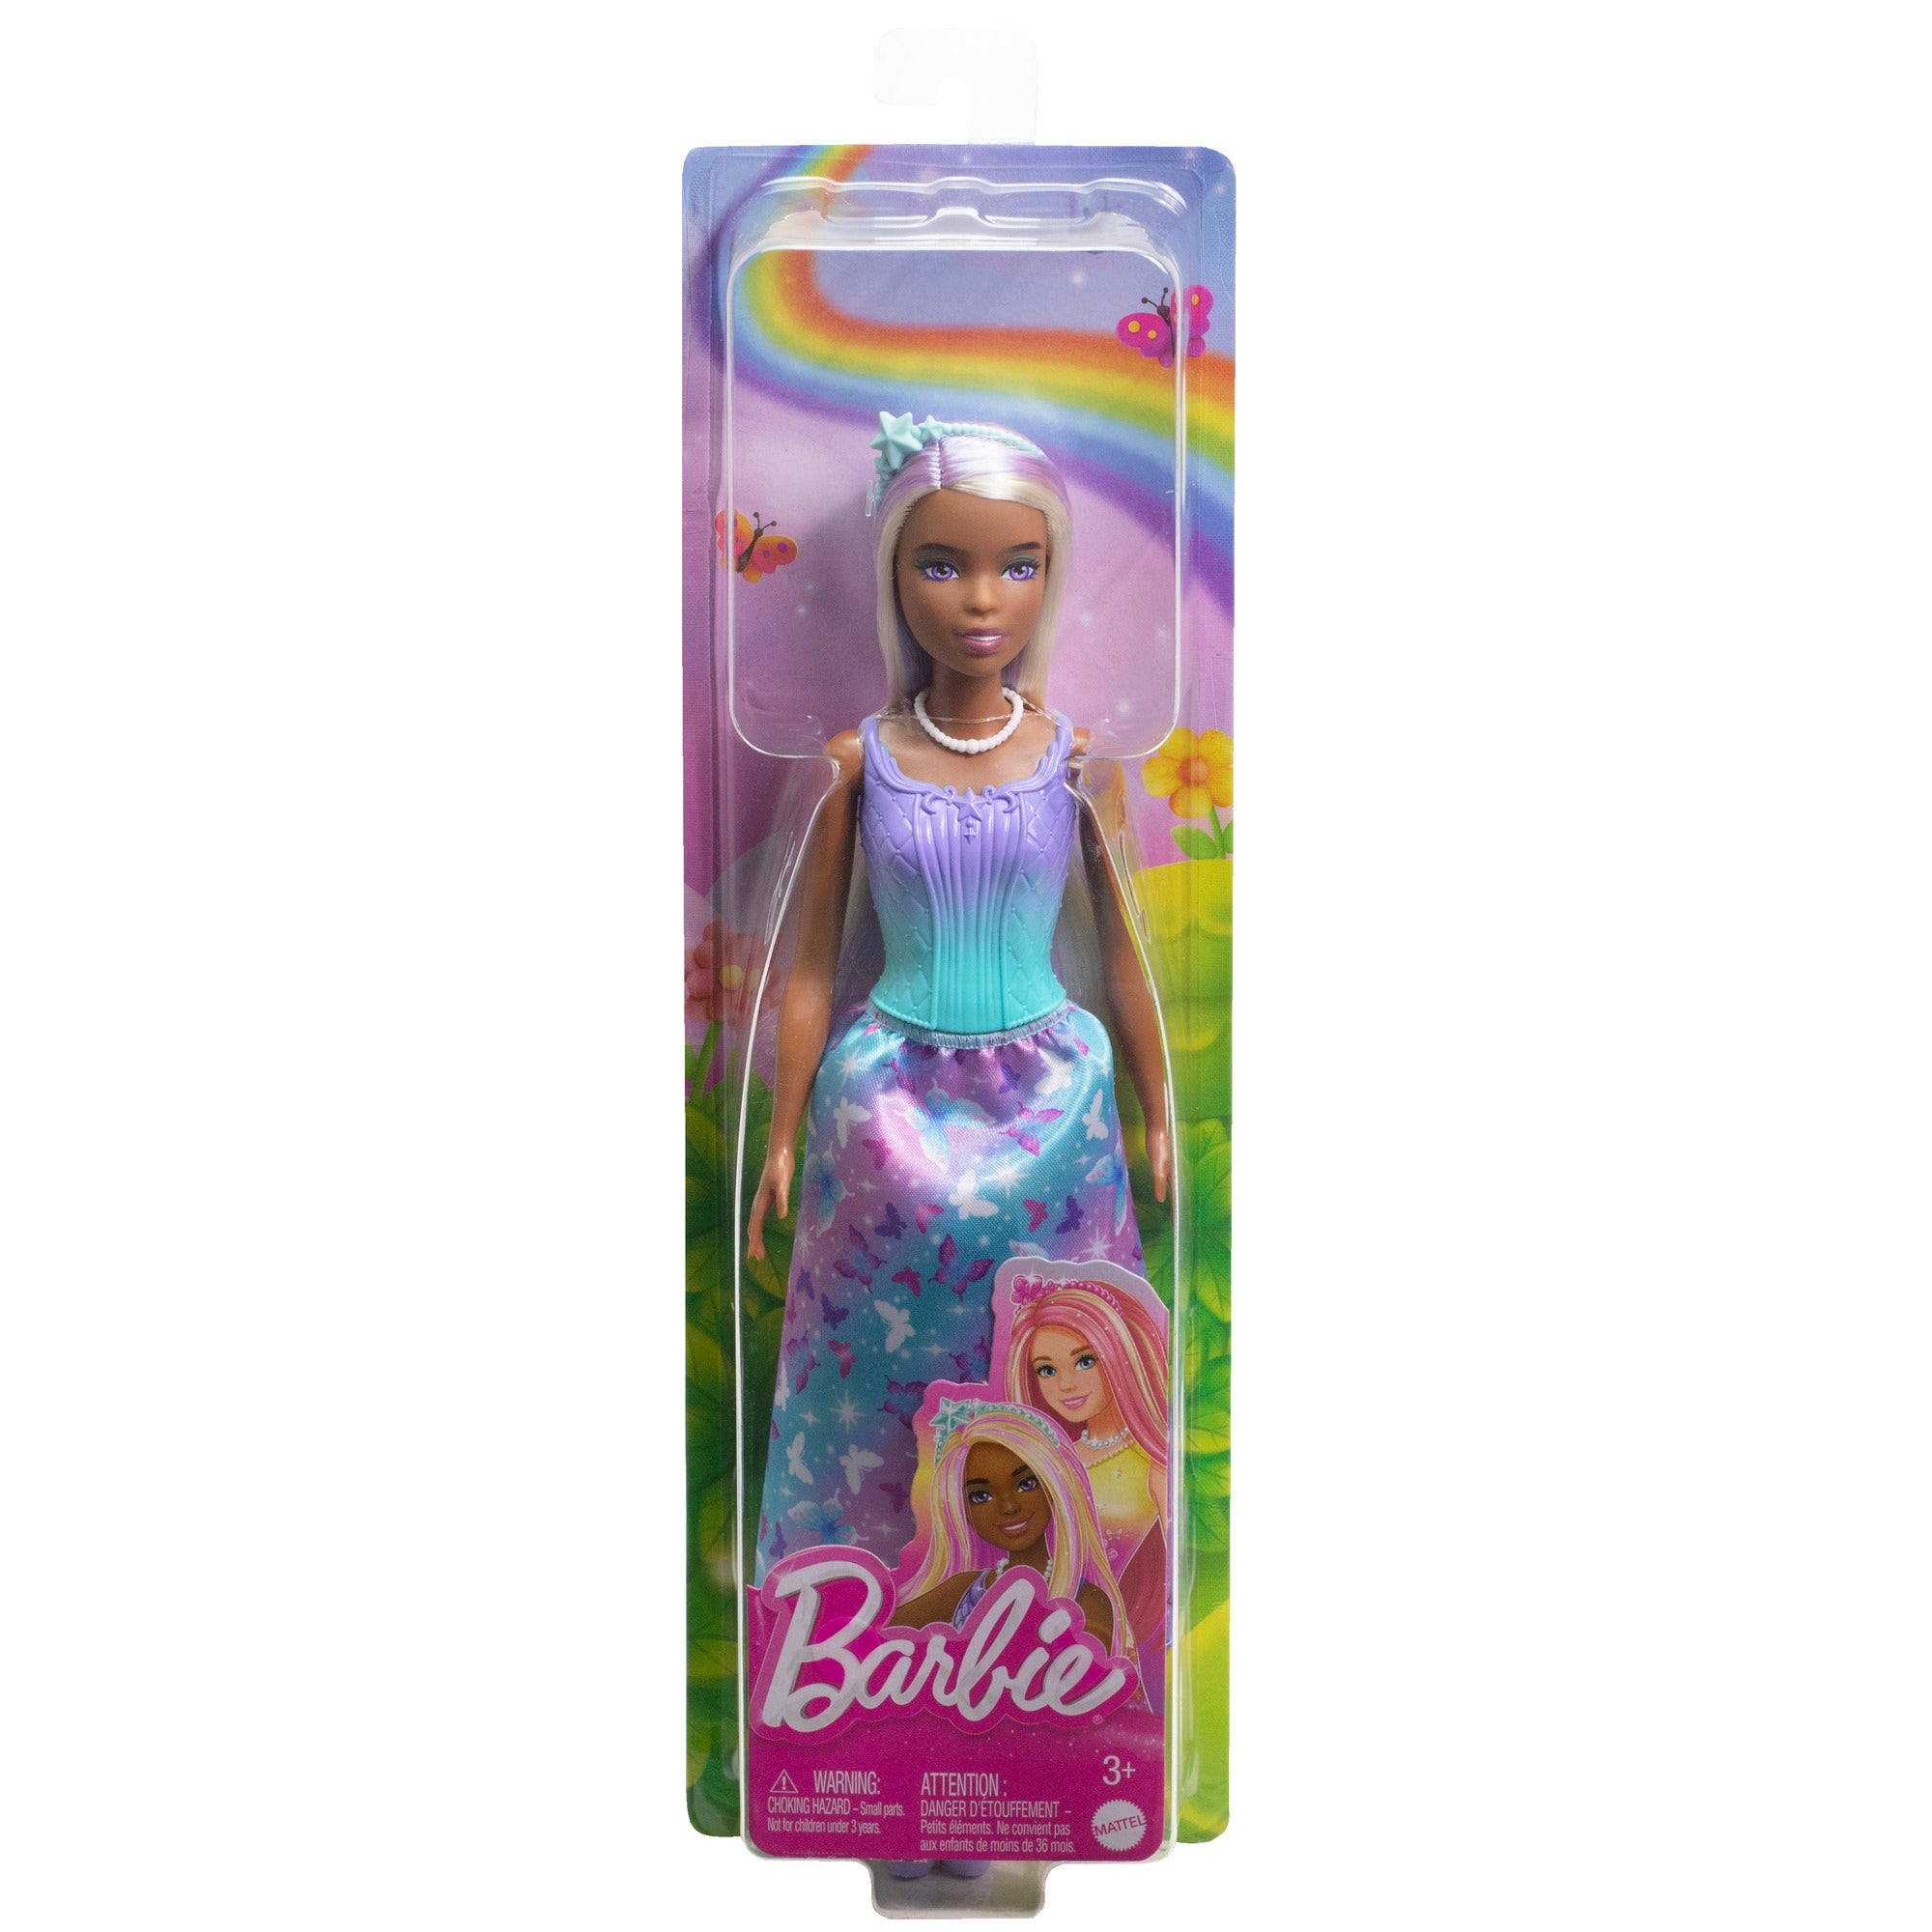 Barbie Royal Doll with Purple-Highlighted Fantasy Hair, Petite Body Type, Colorful Accessories and Butterfly-Print Skirt